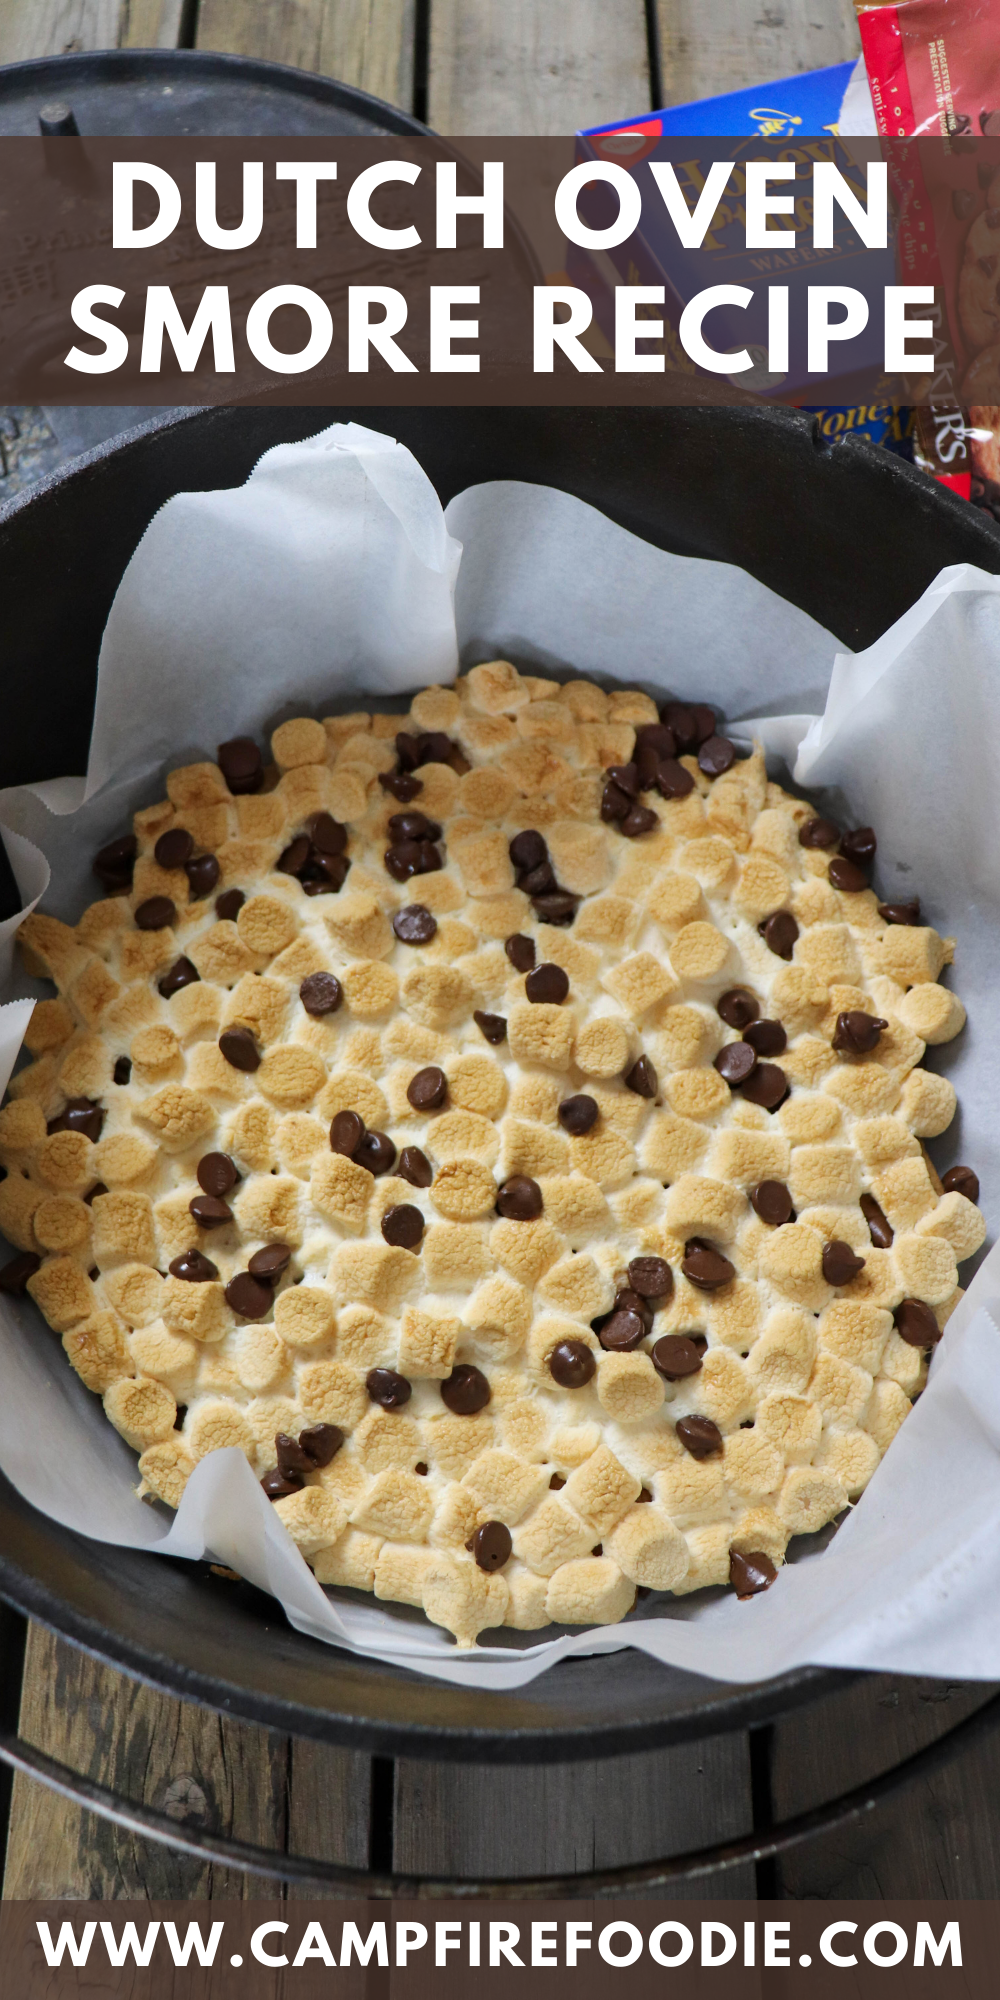 https://campfirefoodie.com/wp-content/uploads/2021/02/Dutch-Oven-Smore-Recipe.png